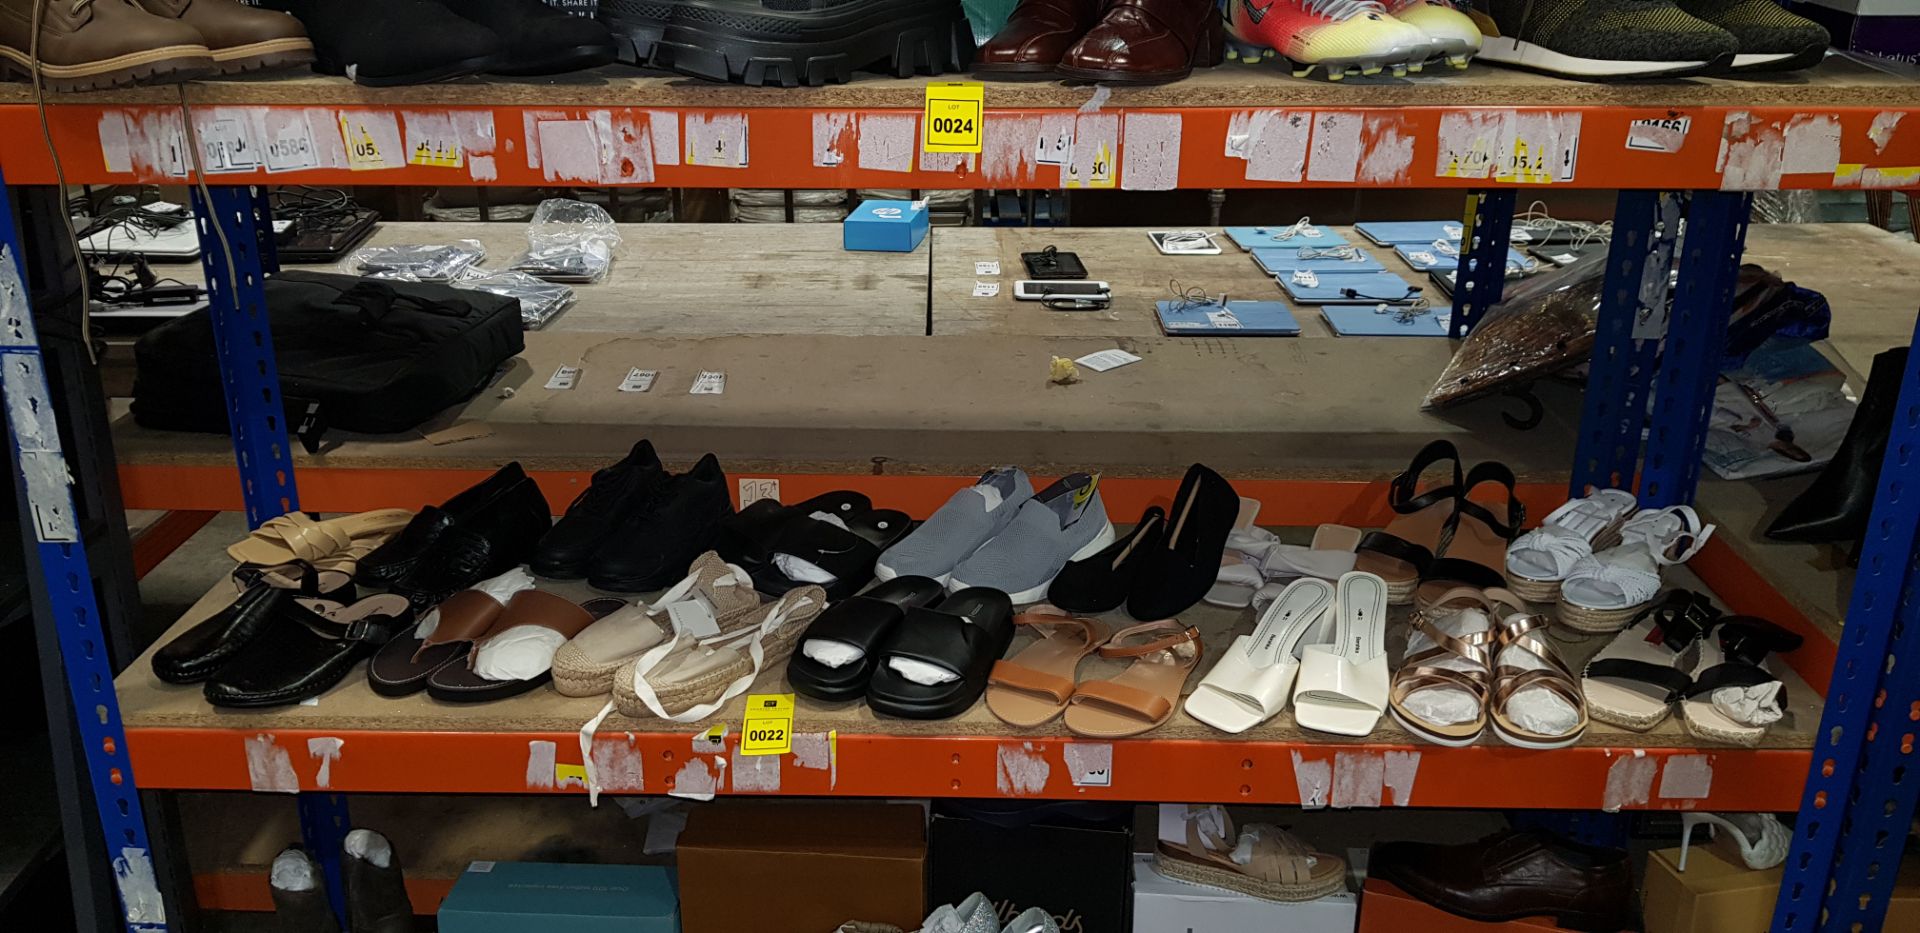 17 X PIECE BRAND NEW MIXED SHOE LOT CONTAINING DOROTHY PERKINS HEELED SHOES AND SANDALS, PULL AND